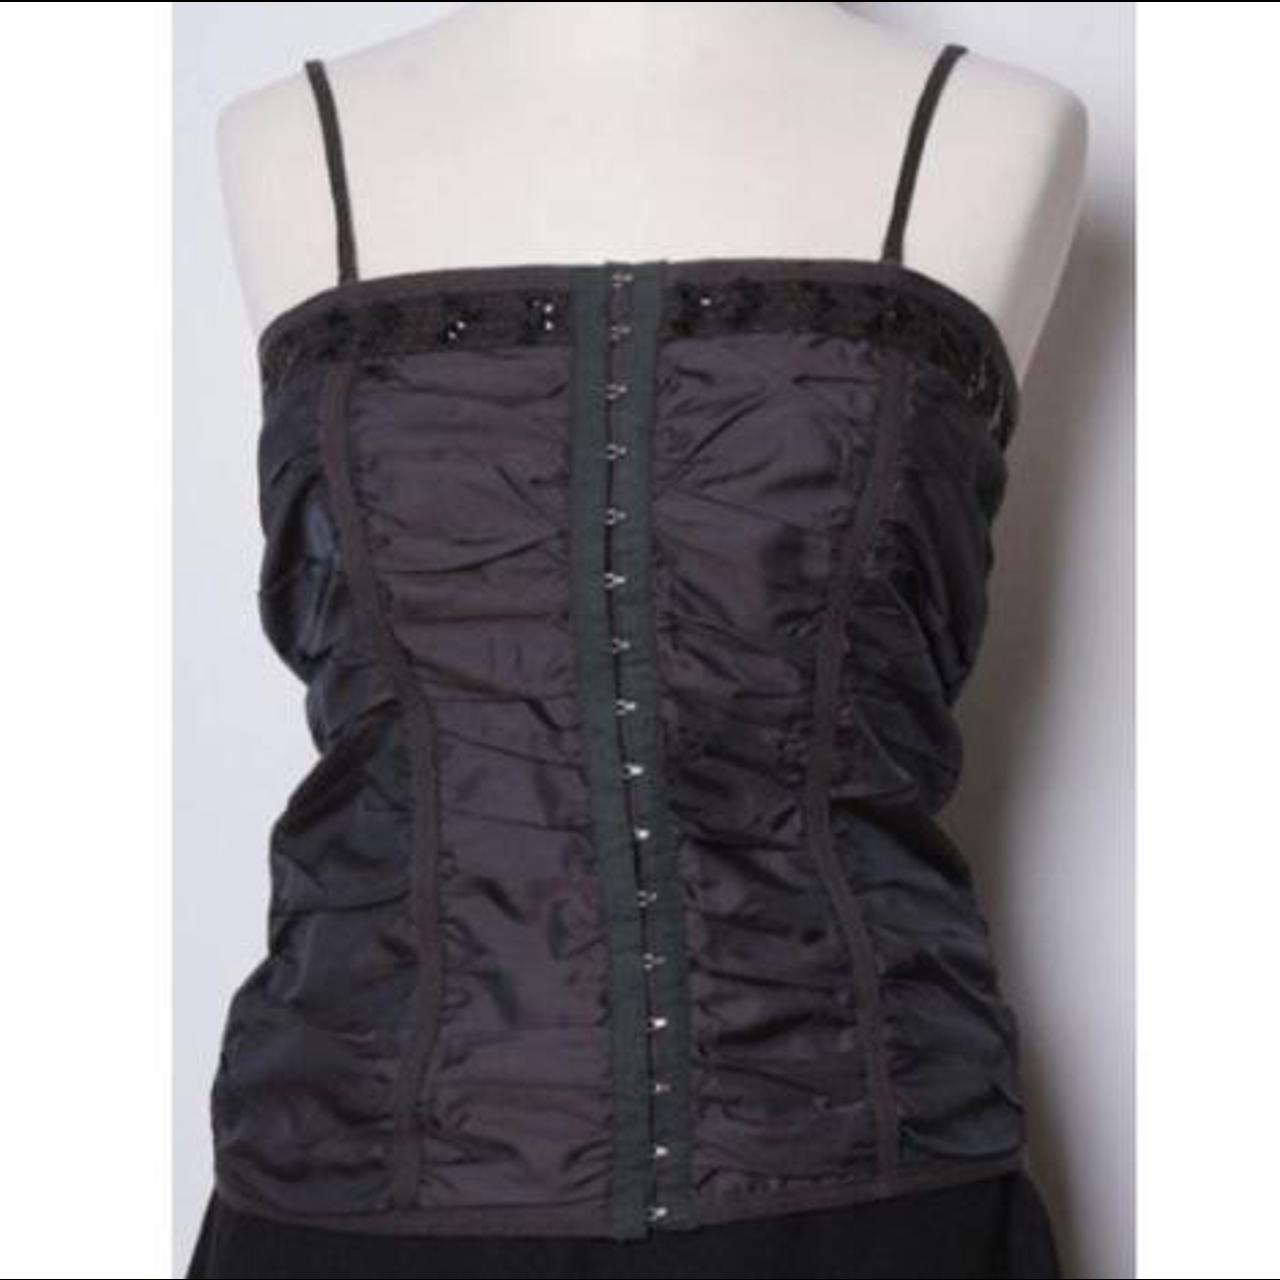 Product Image 3 - Vintage 90s corset/camisole/bustier style top!